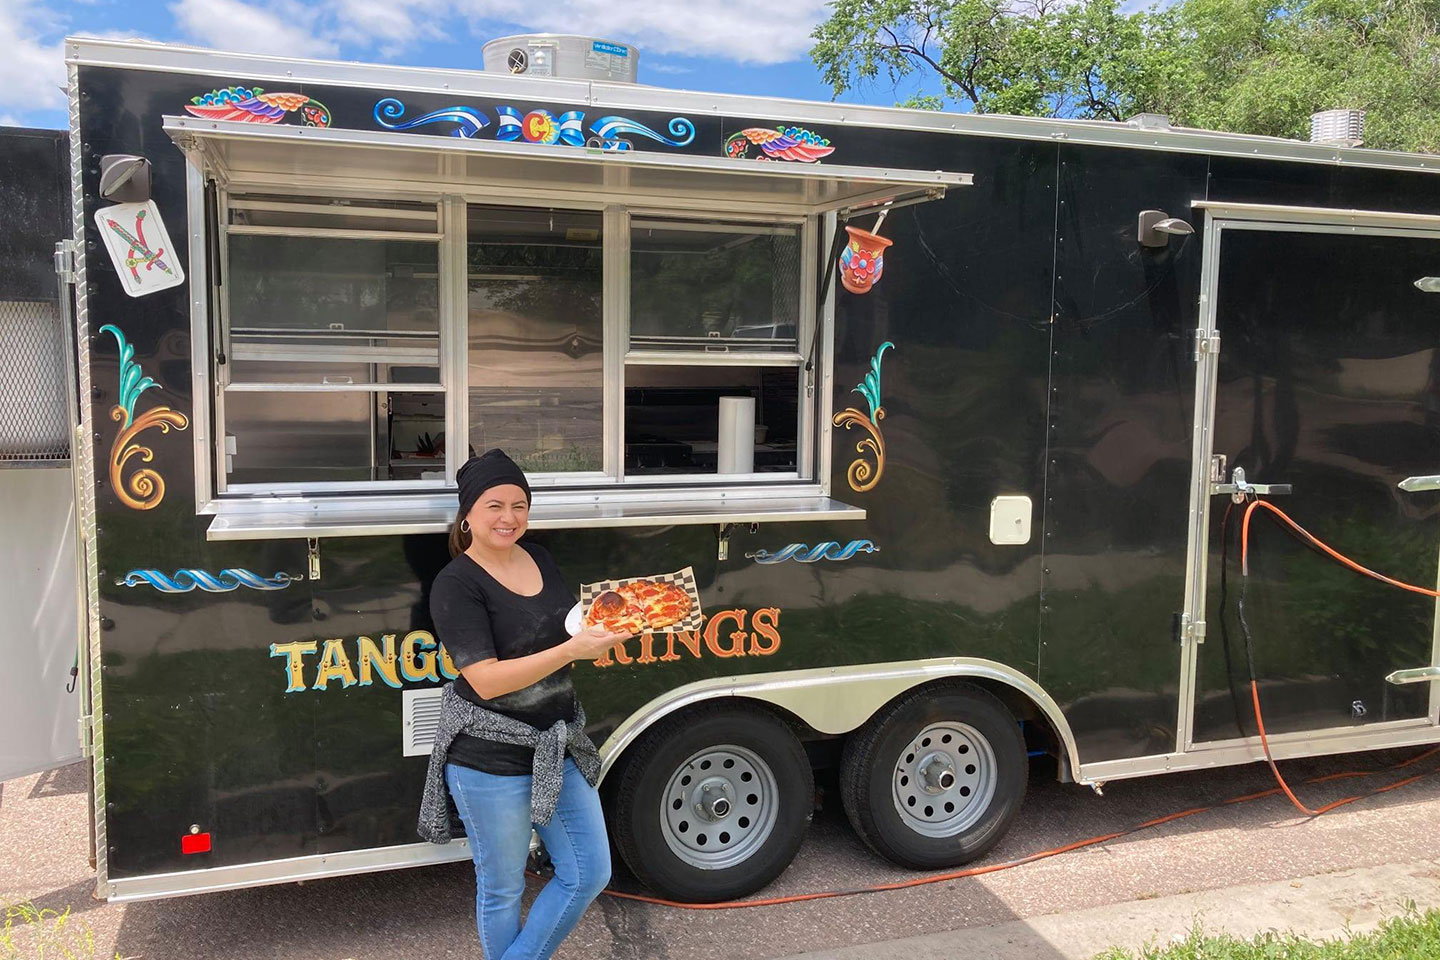 Unfortunately, Tango Springs is no longer in operation. We appreciate them for serving our neighbors and want to give them credit here on our page for their generosity.